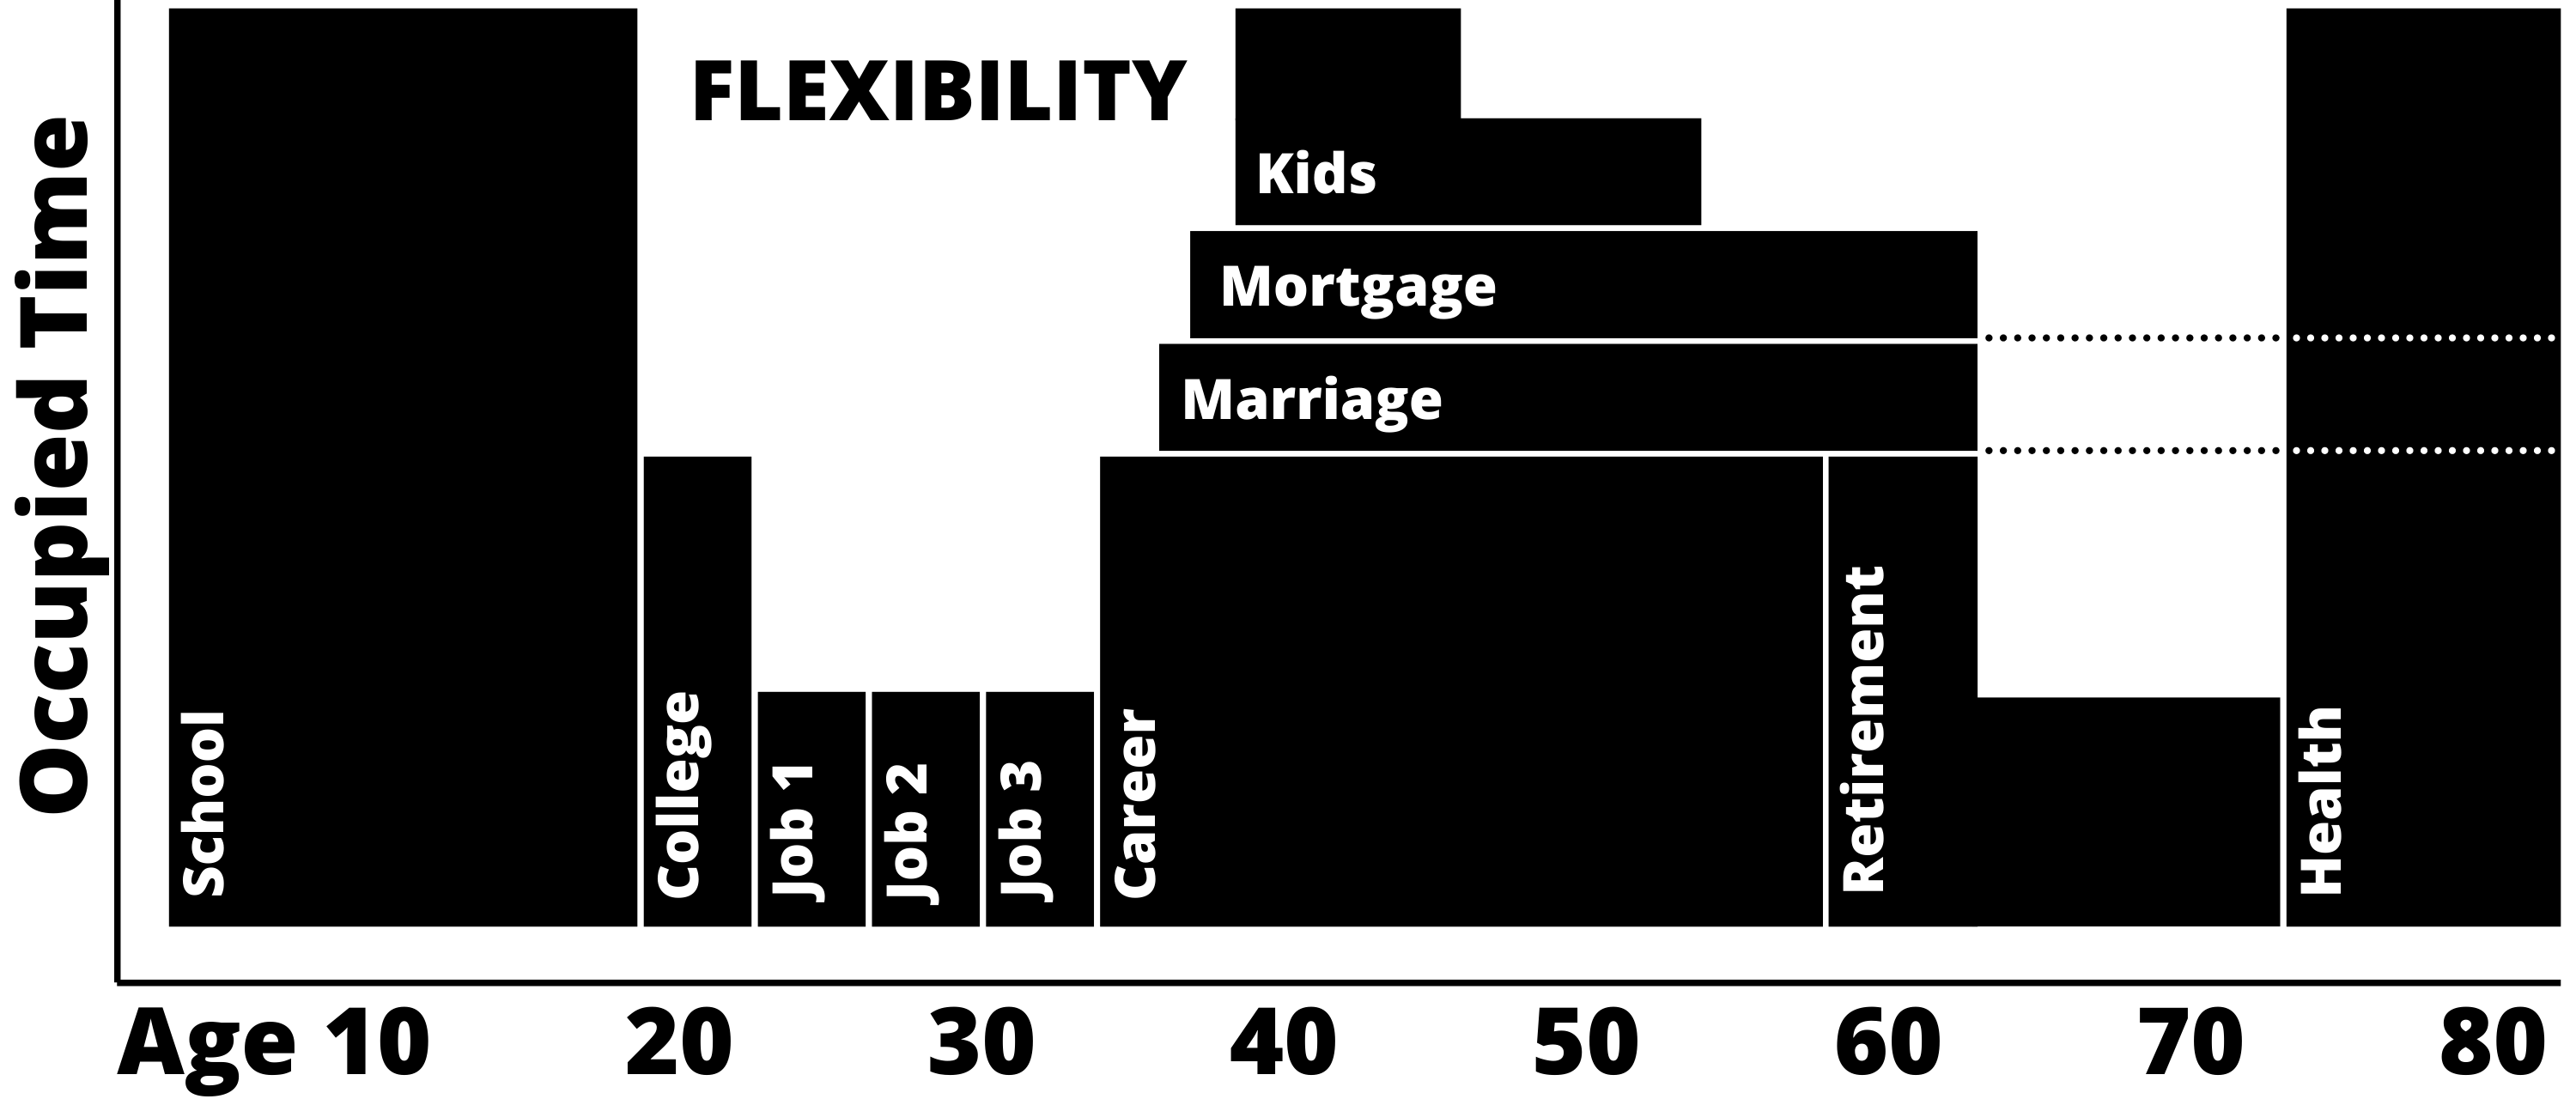 A graph explaining how responsibilities change throughout one's life and the impact those responsibilities have on one's flexibility